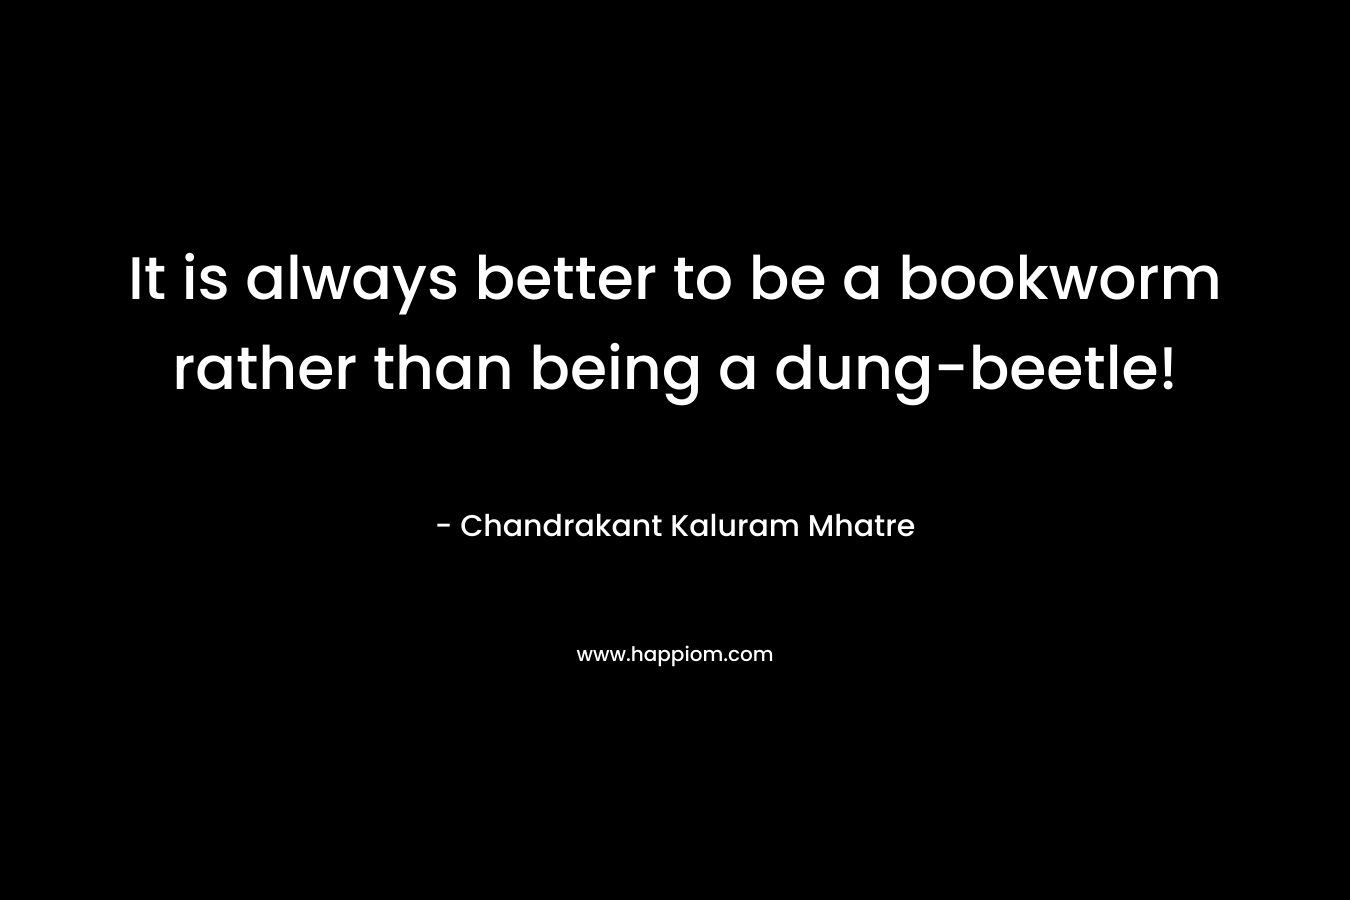 It is always better to be a bookworm rather than being a dung-beetle! – Chandrakant Kaluram Mhatre